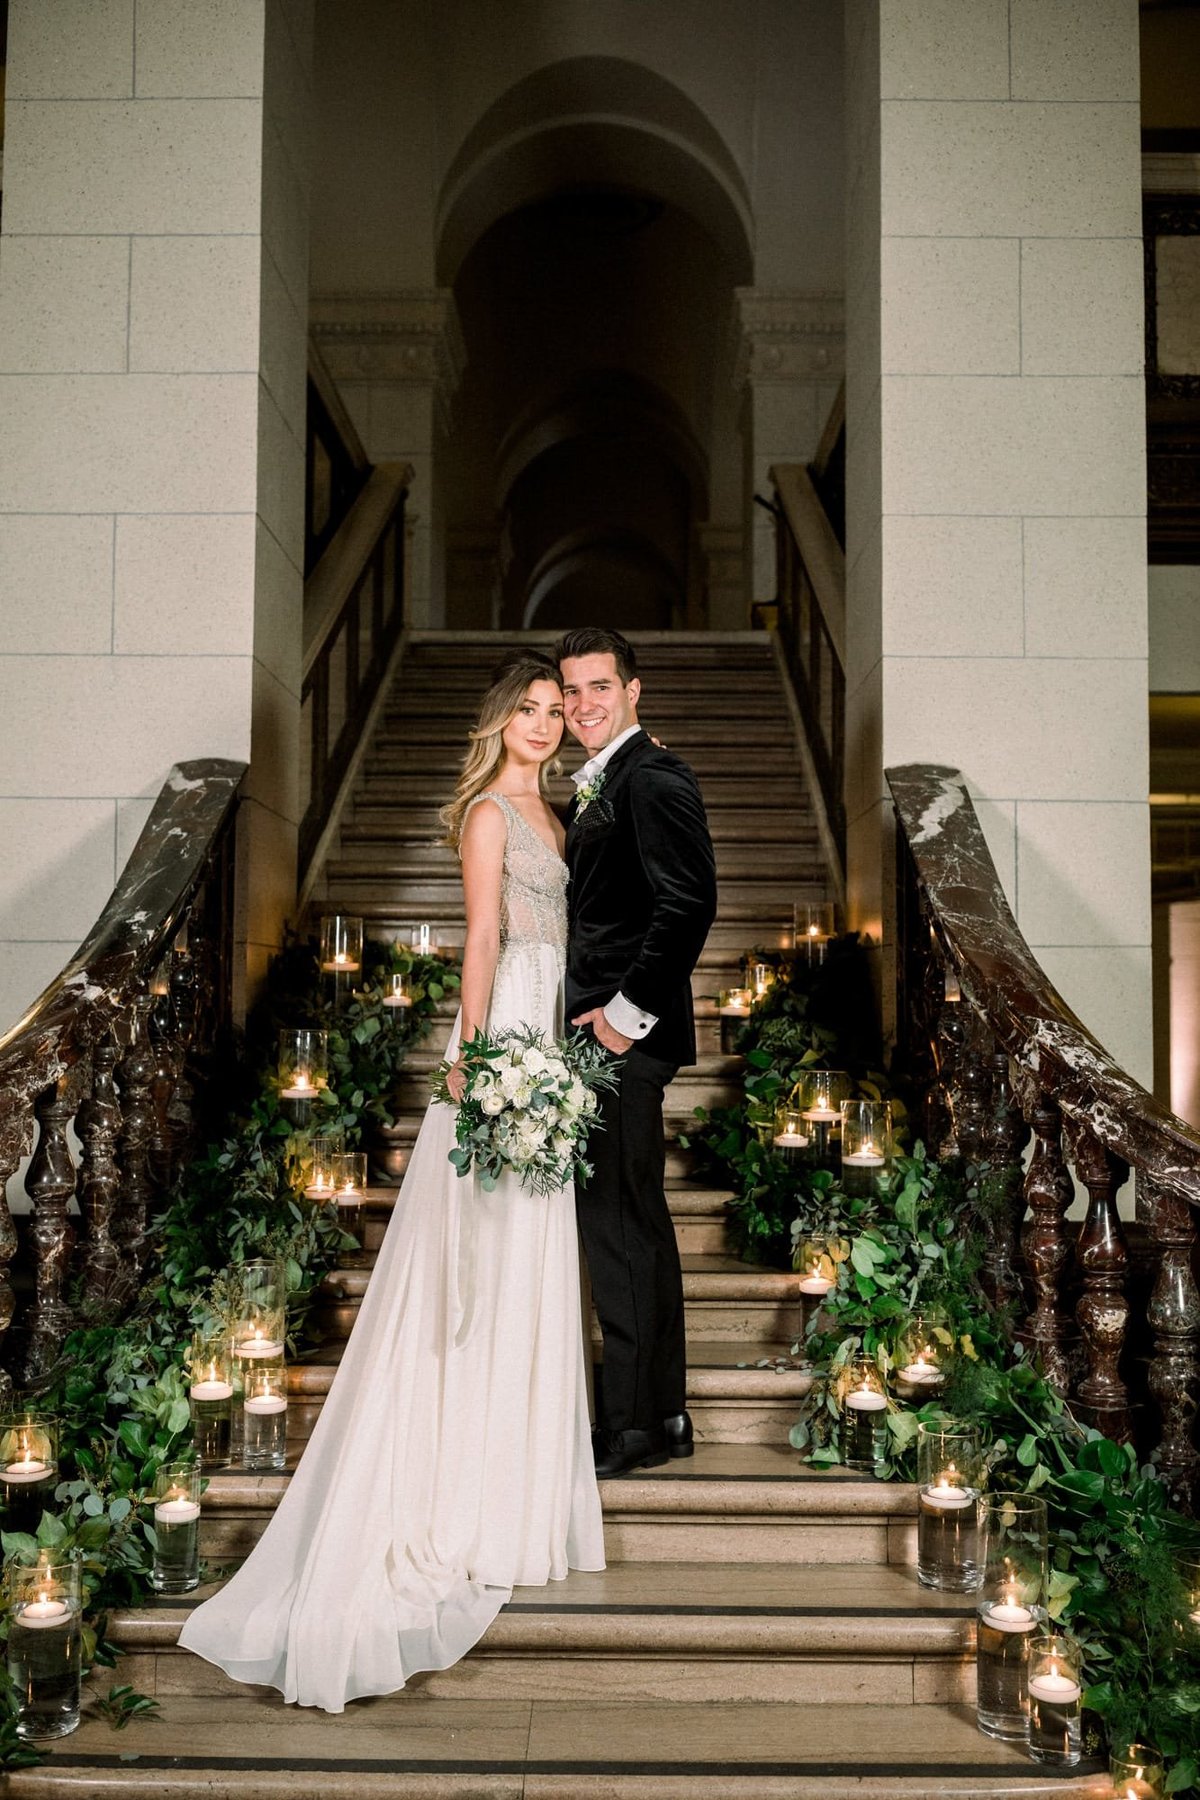 Bride and Groom pose together while standing on a decorated staircase at The Majestic in Downtown LA